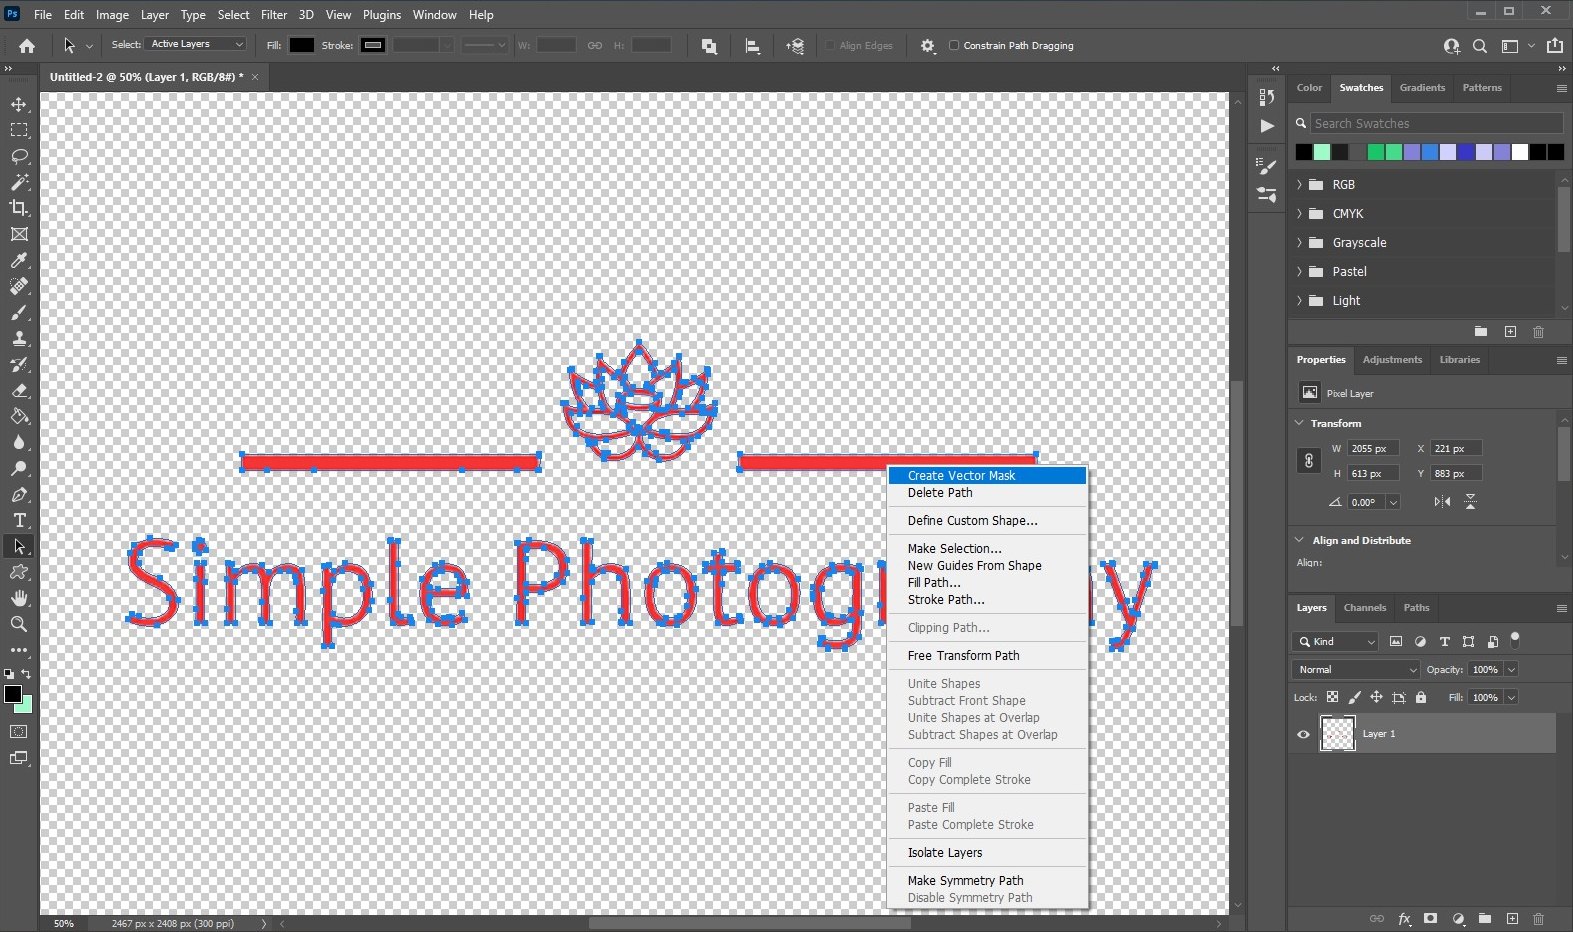 vectorize image in photoshop - 4